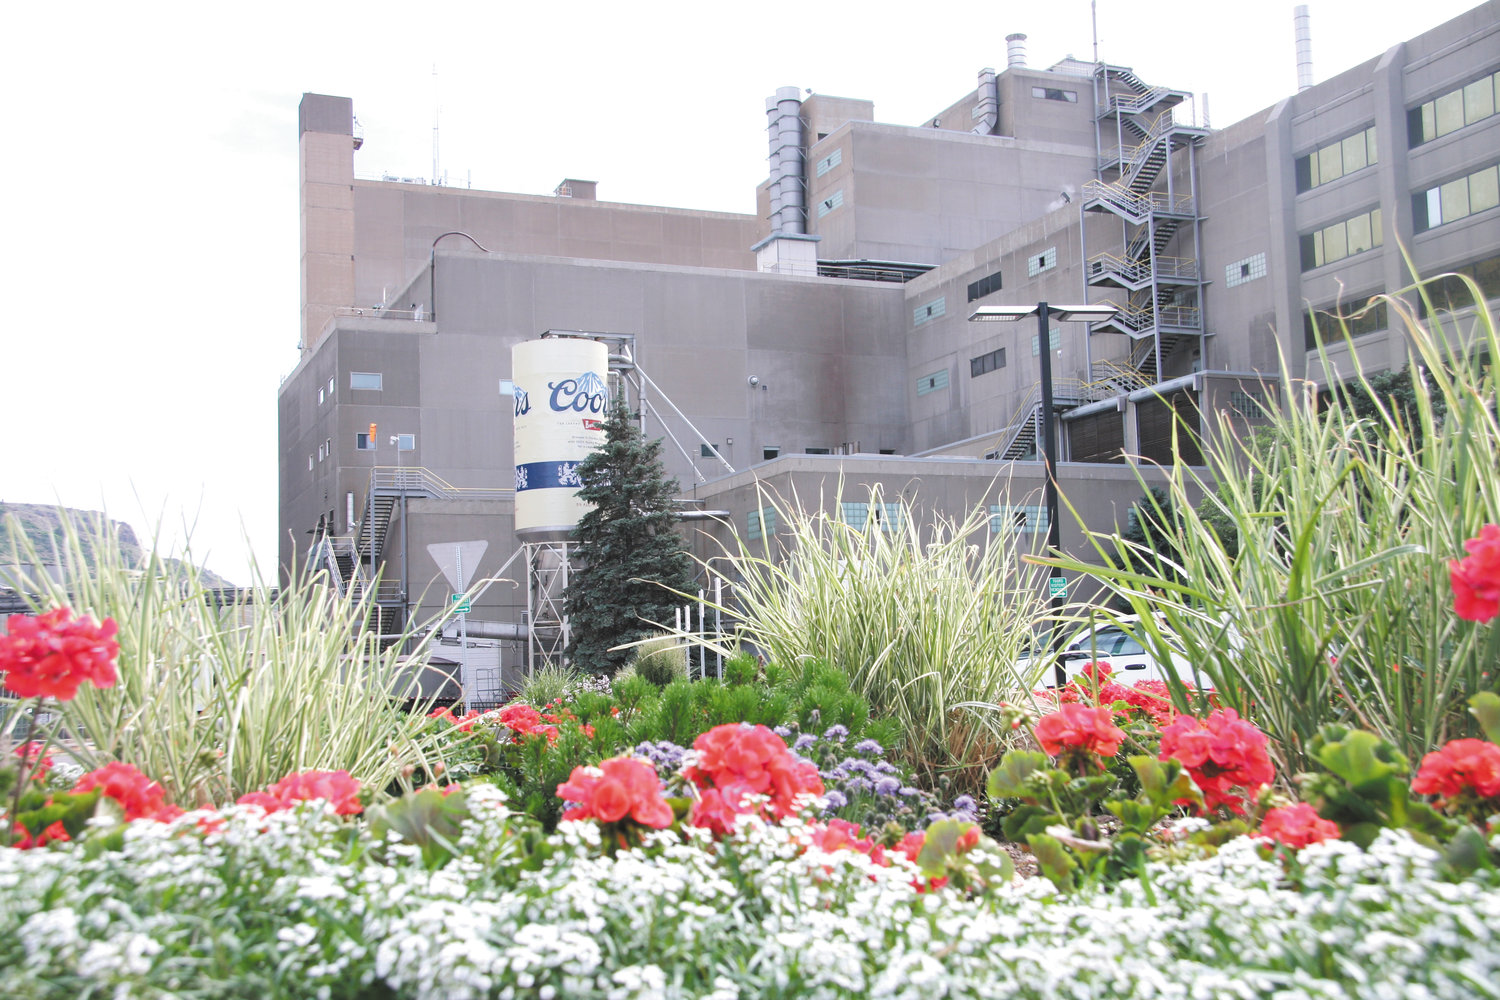 The Coors Brewery in Golden is the largest standalone brewery in North America.